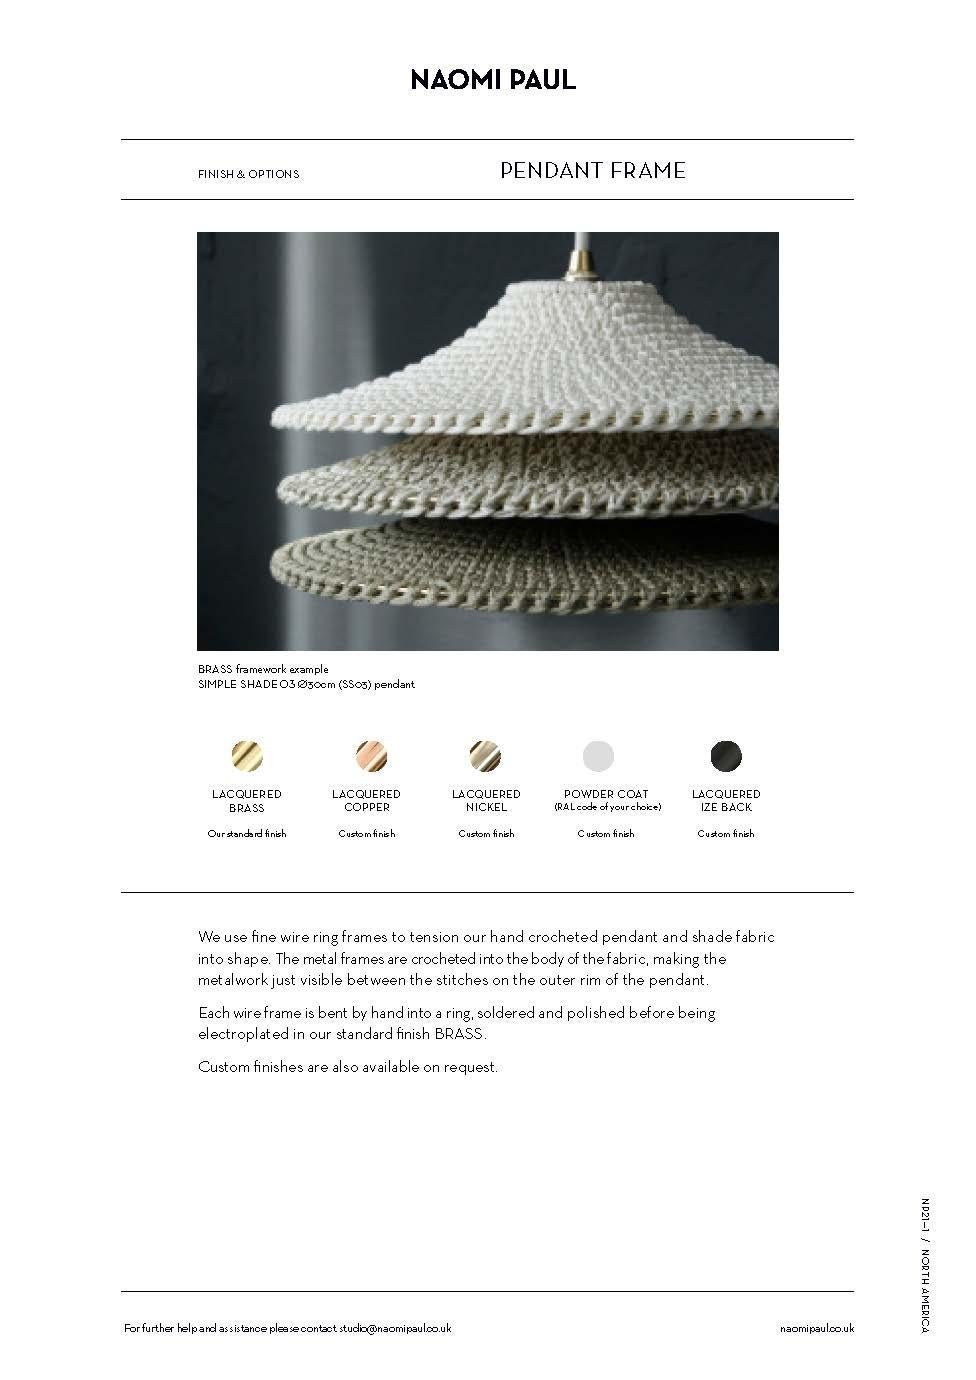 British BAMBOO SOLITAIRE 02 Pendant Light Ø80cm/31.5in, Hand Crocheted in Bamboo Paper